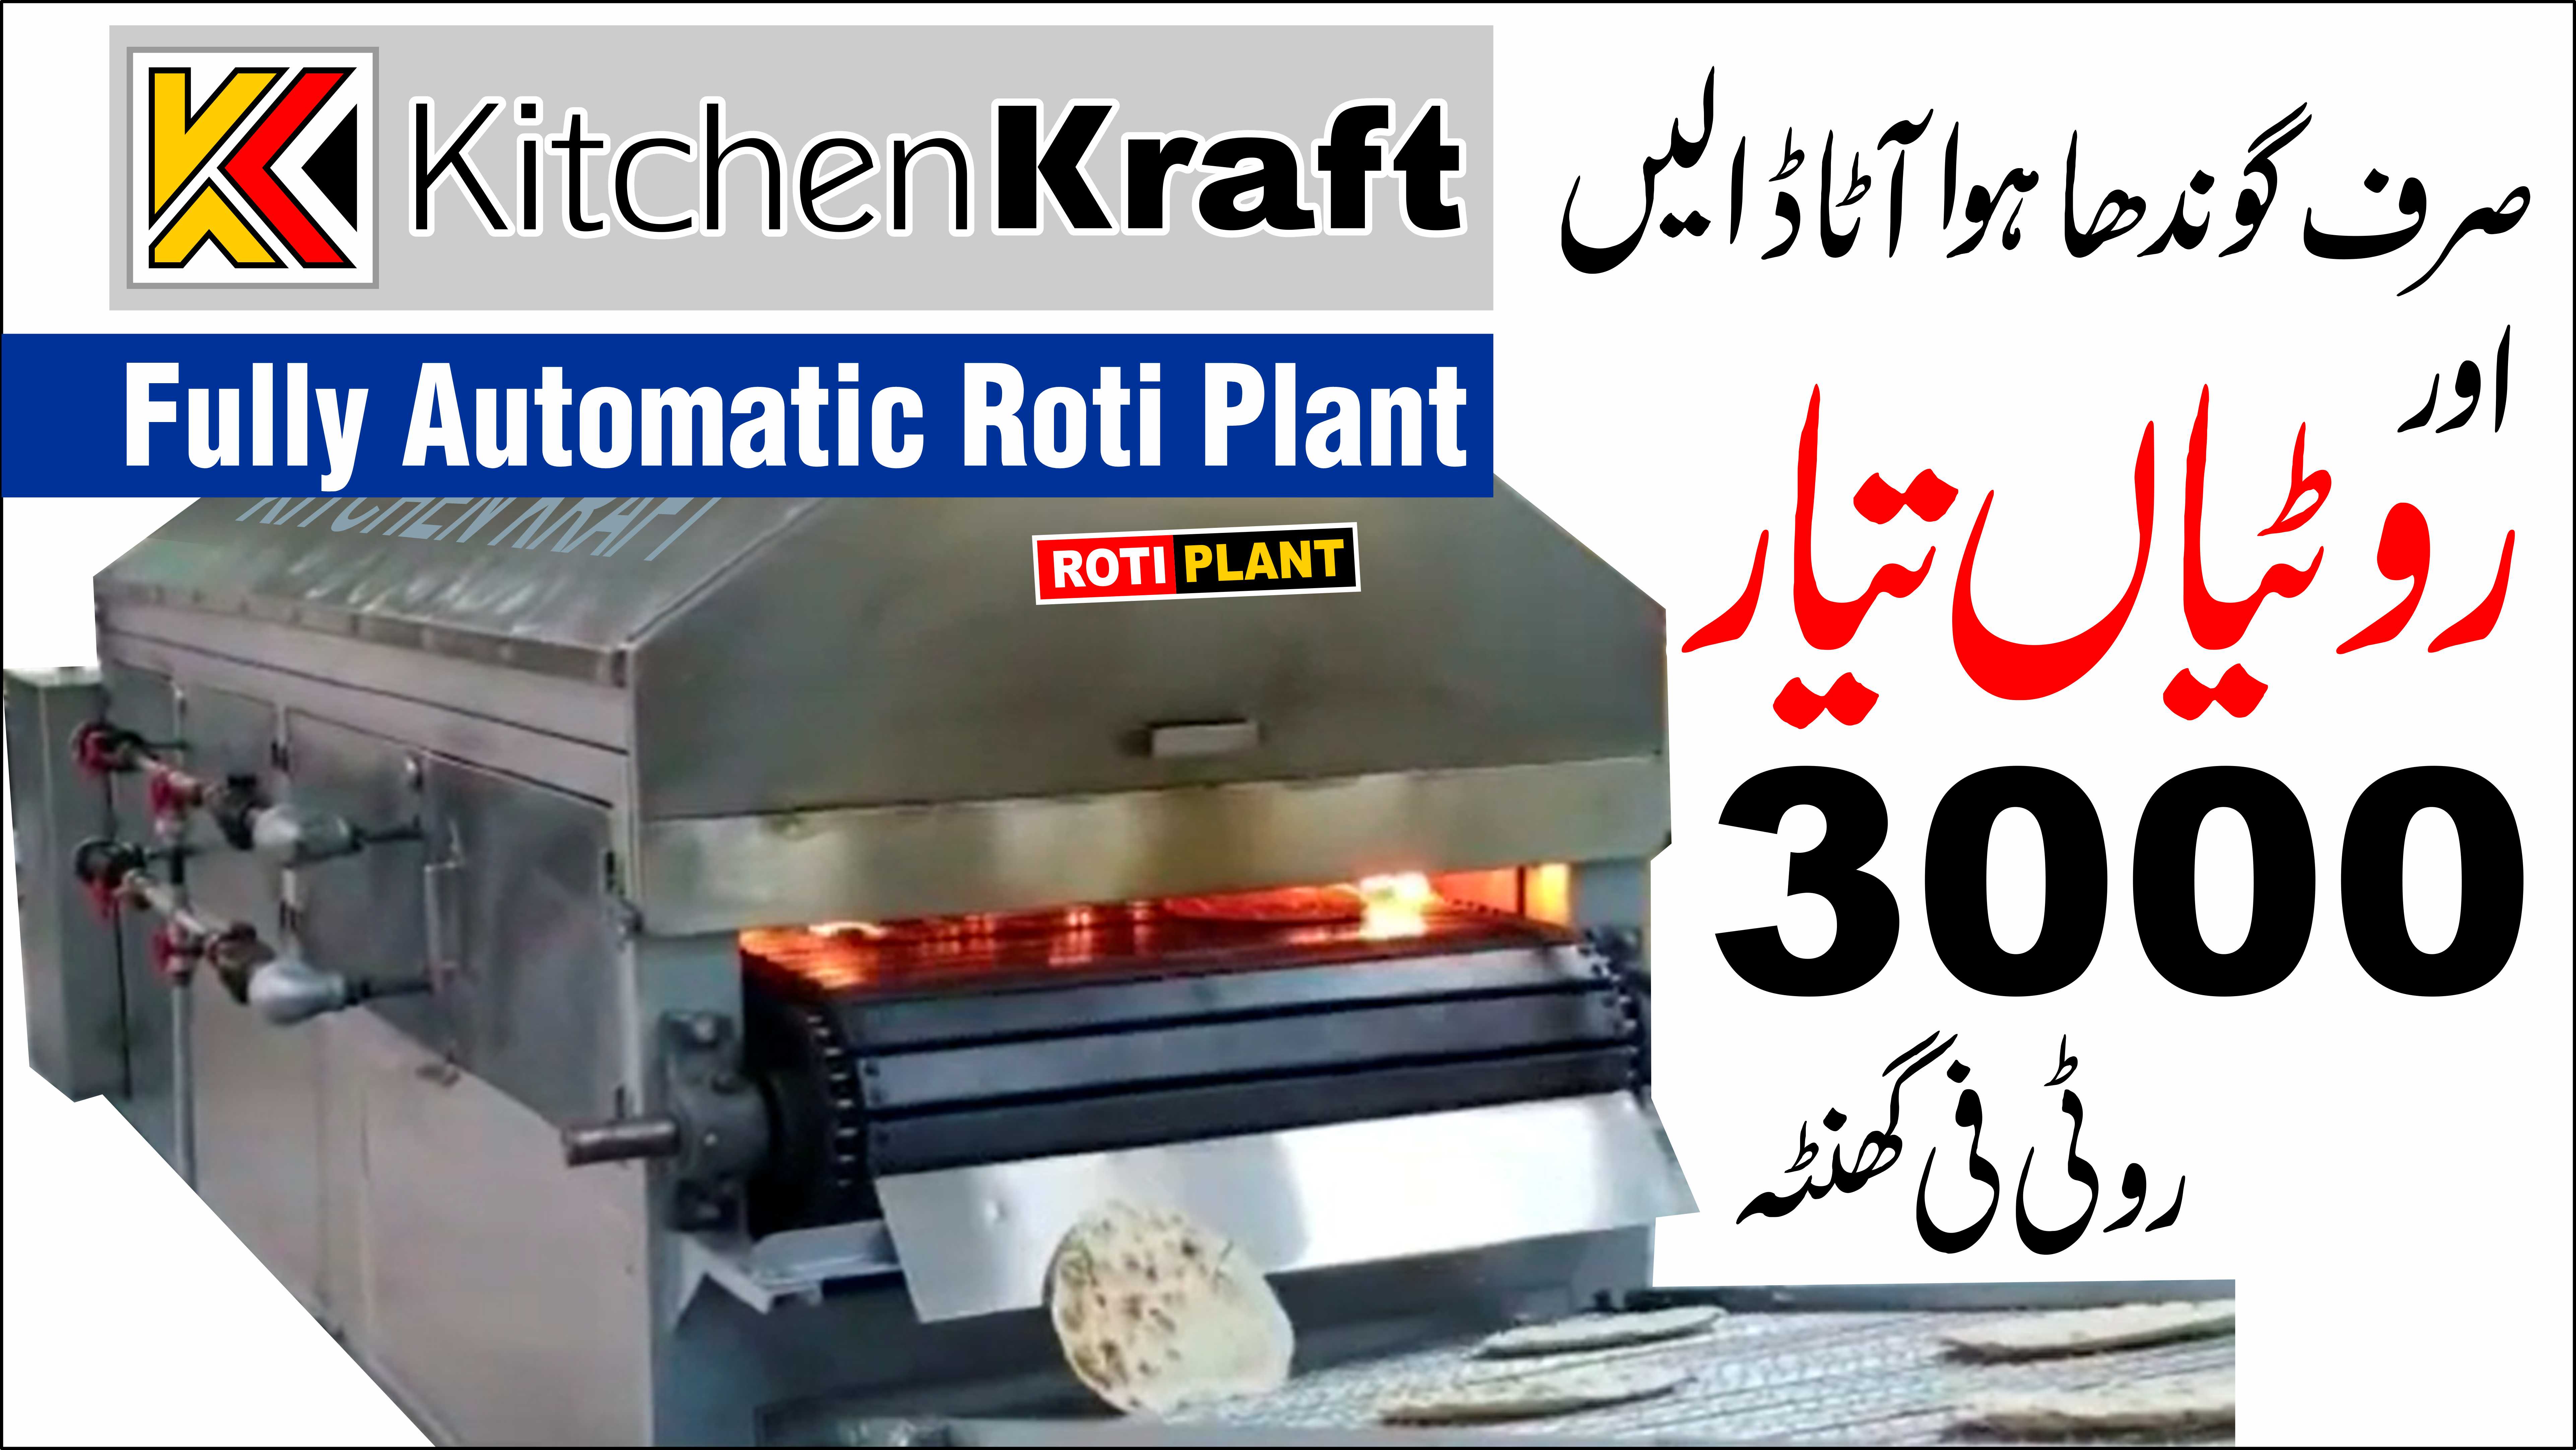 Fully Automatic Roti Plant 